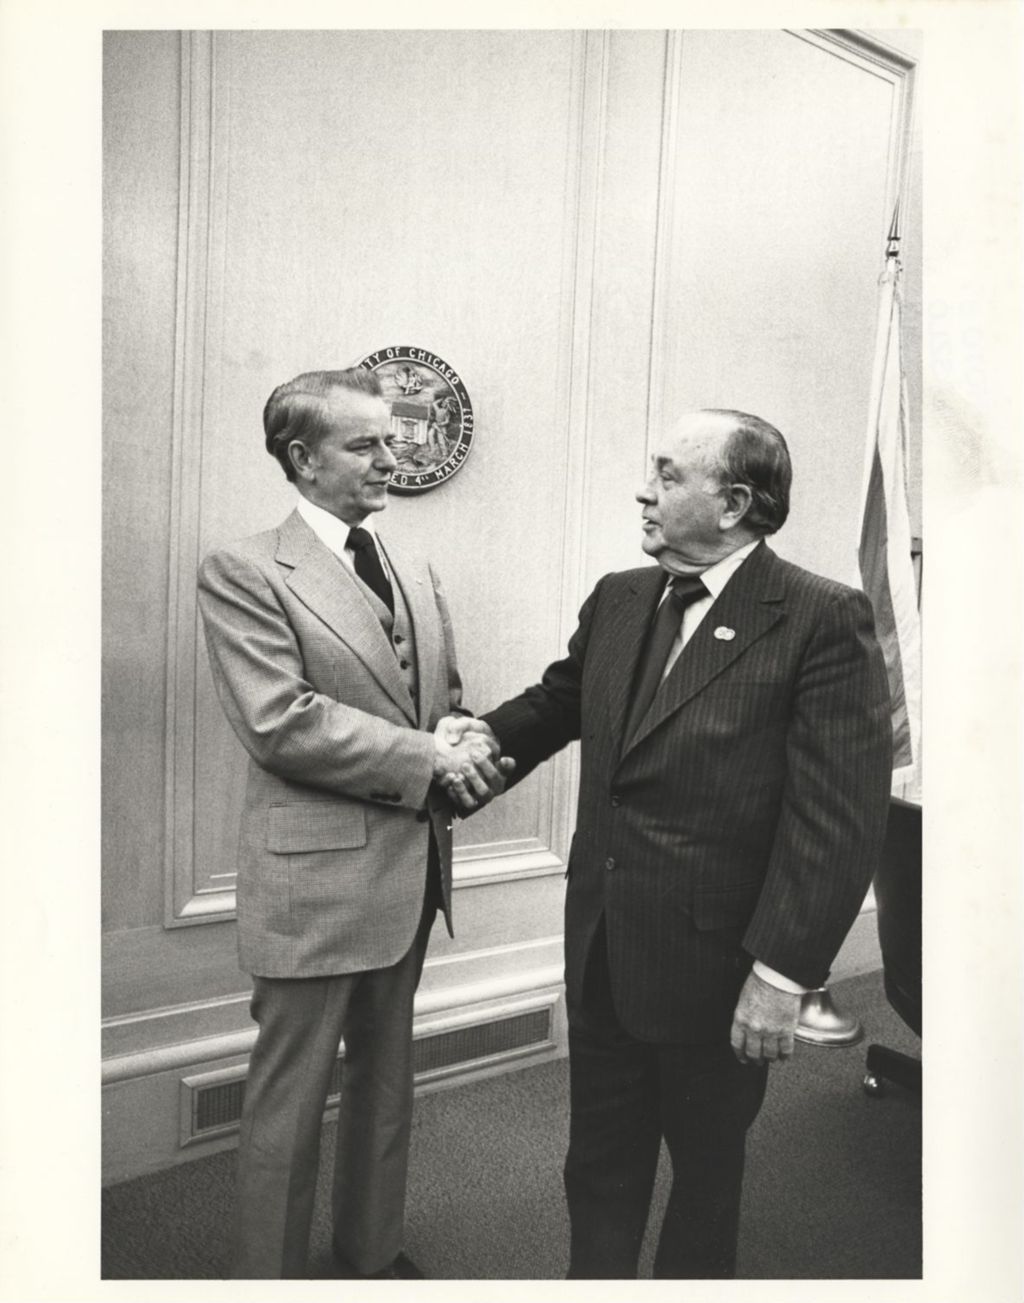 Miniature of Robert Byrd with Richard J. Daley